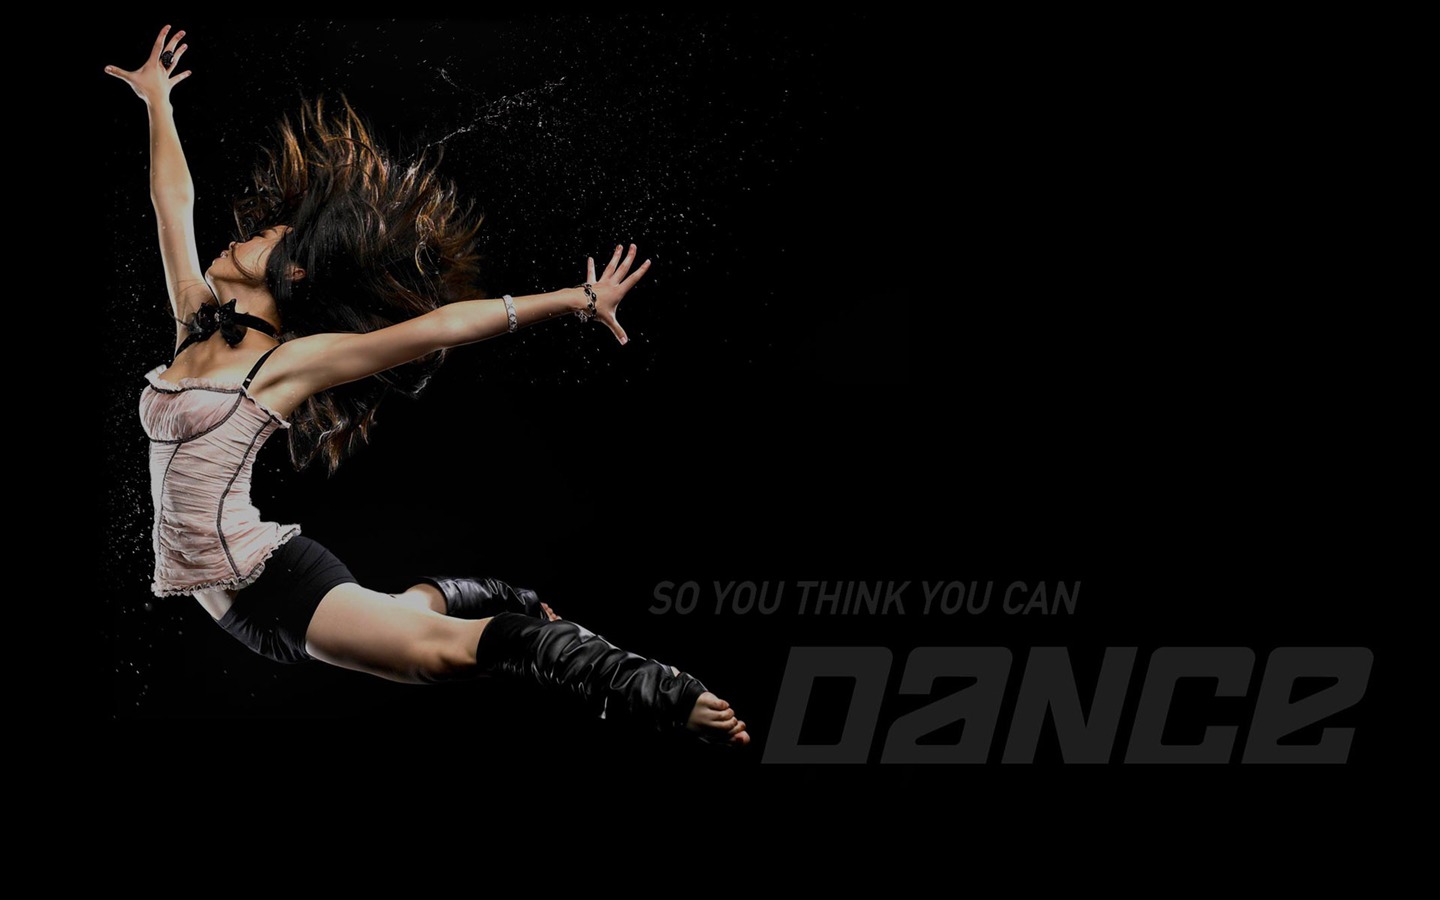 So You Think You Can Dance 舞林争霸 壁纸(一)1 - 1440x900